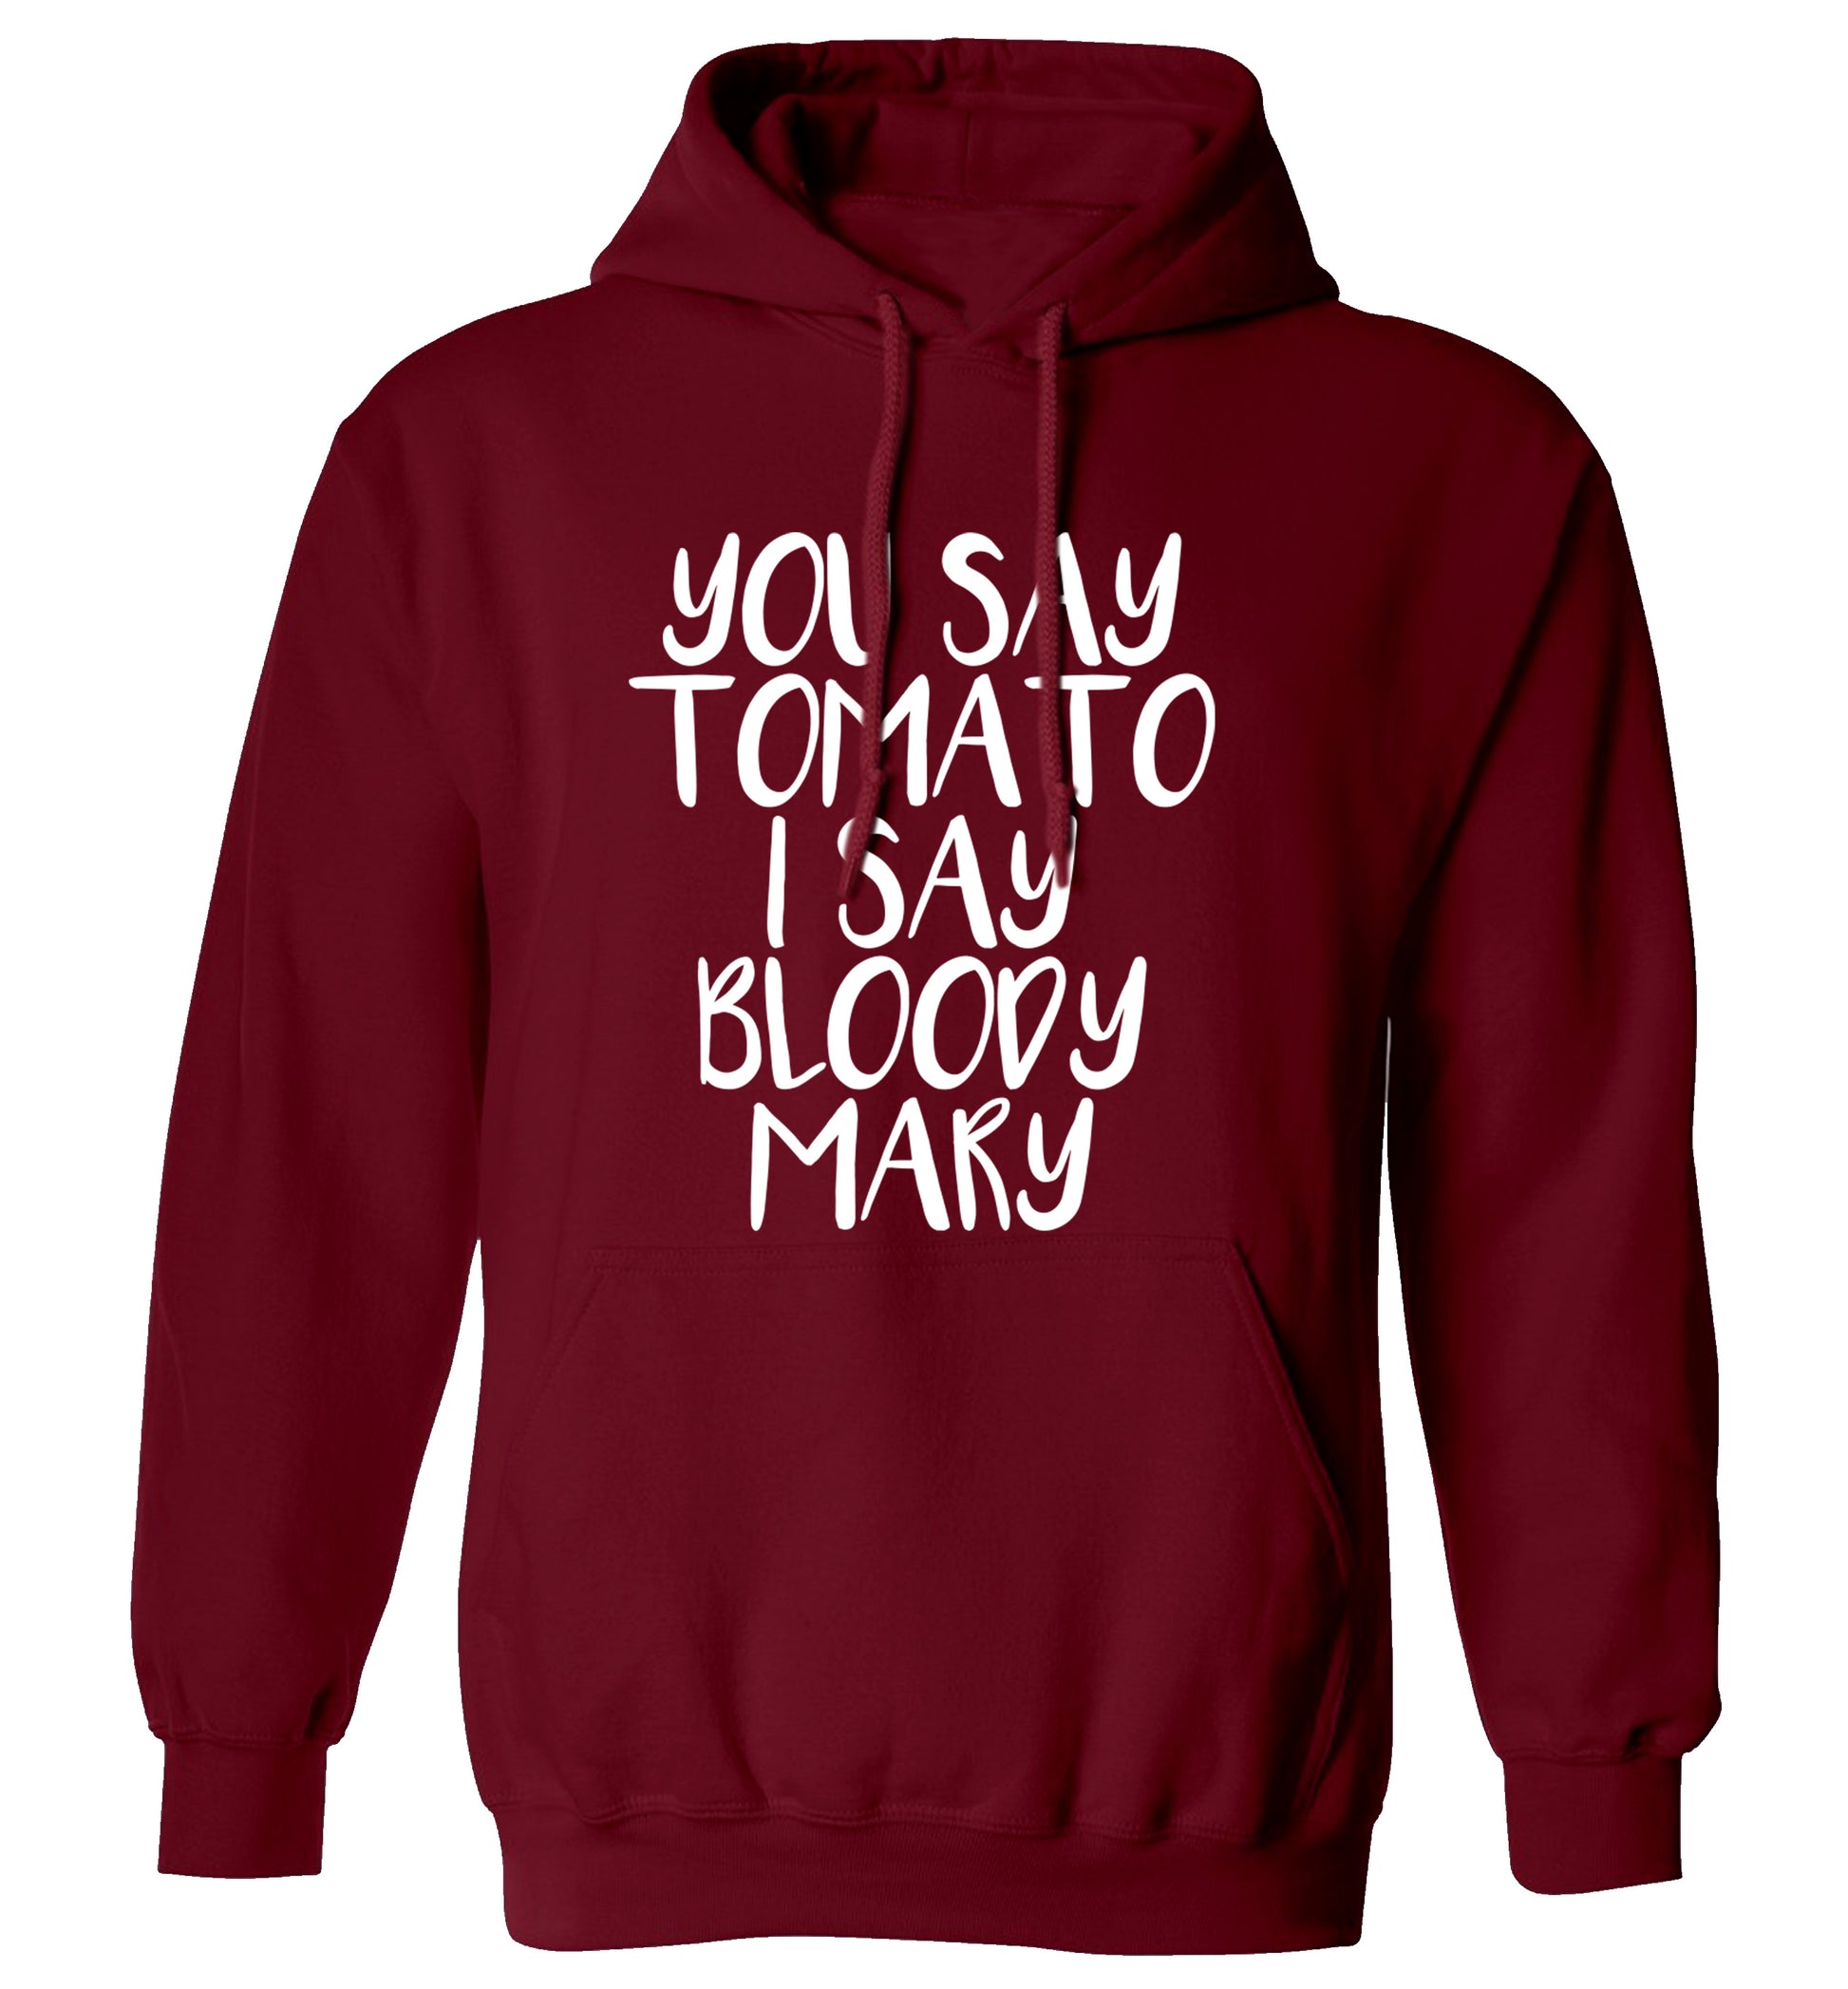 You say tomato I say bloody mary adults unisex maroon hoodie 2XL